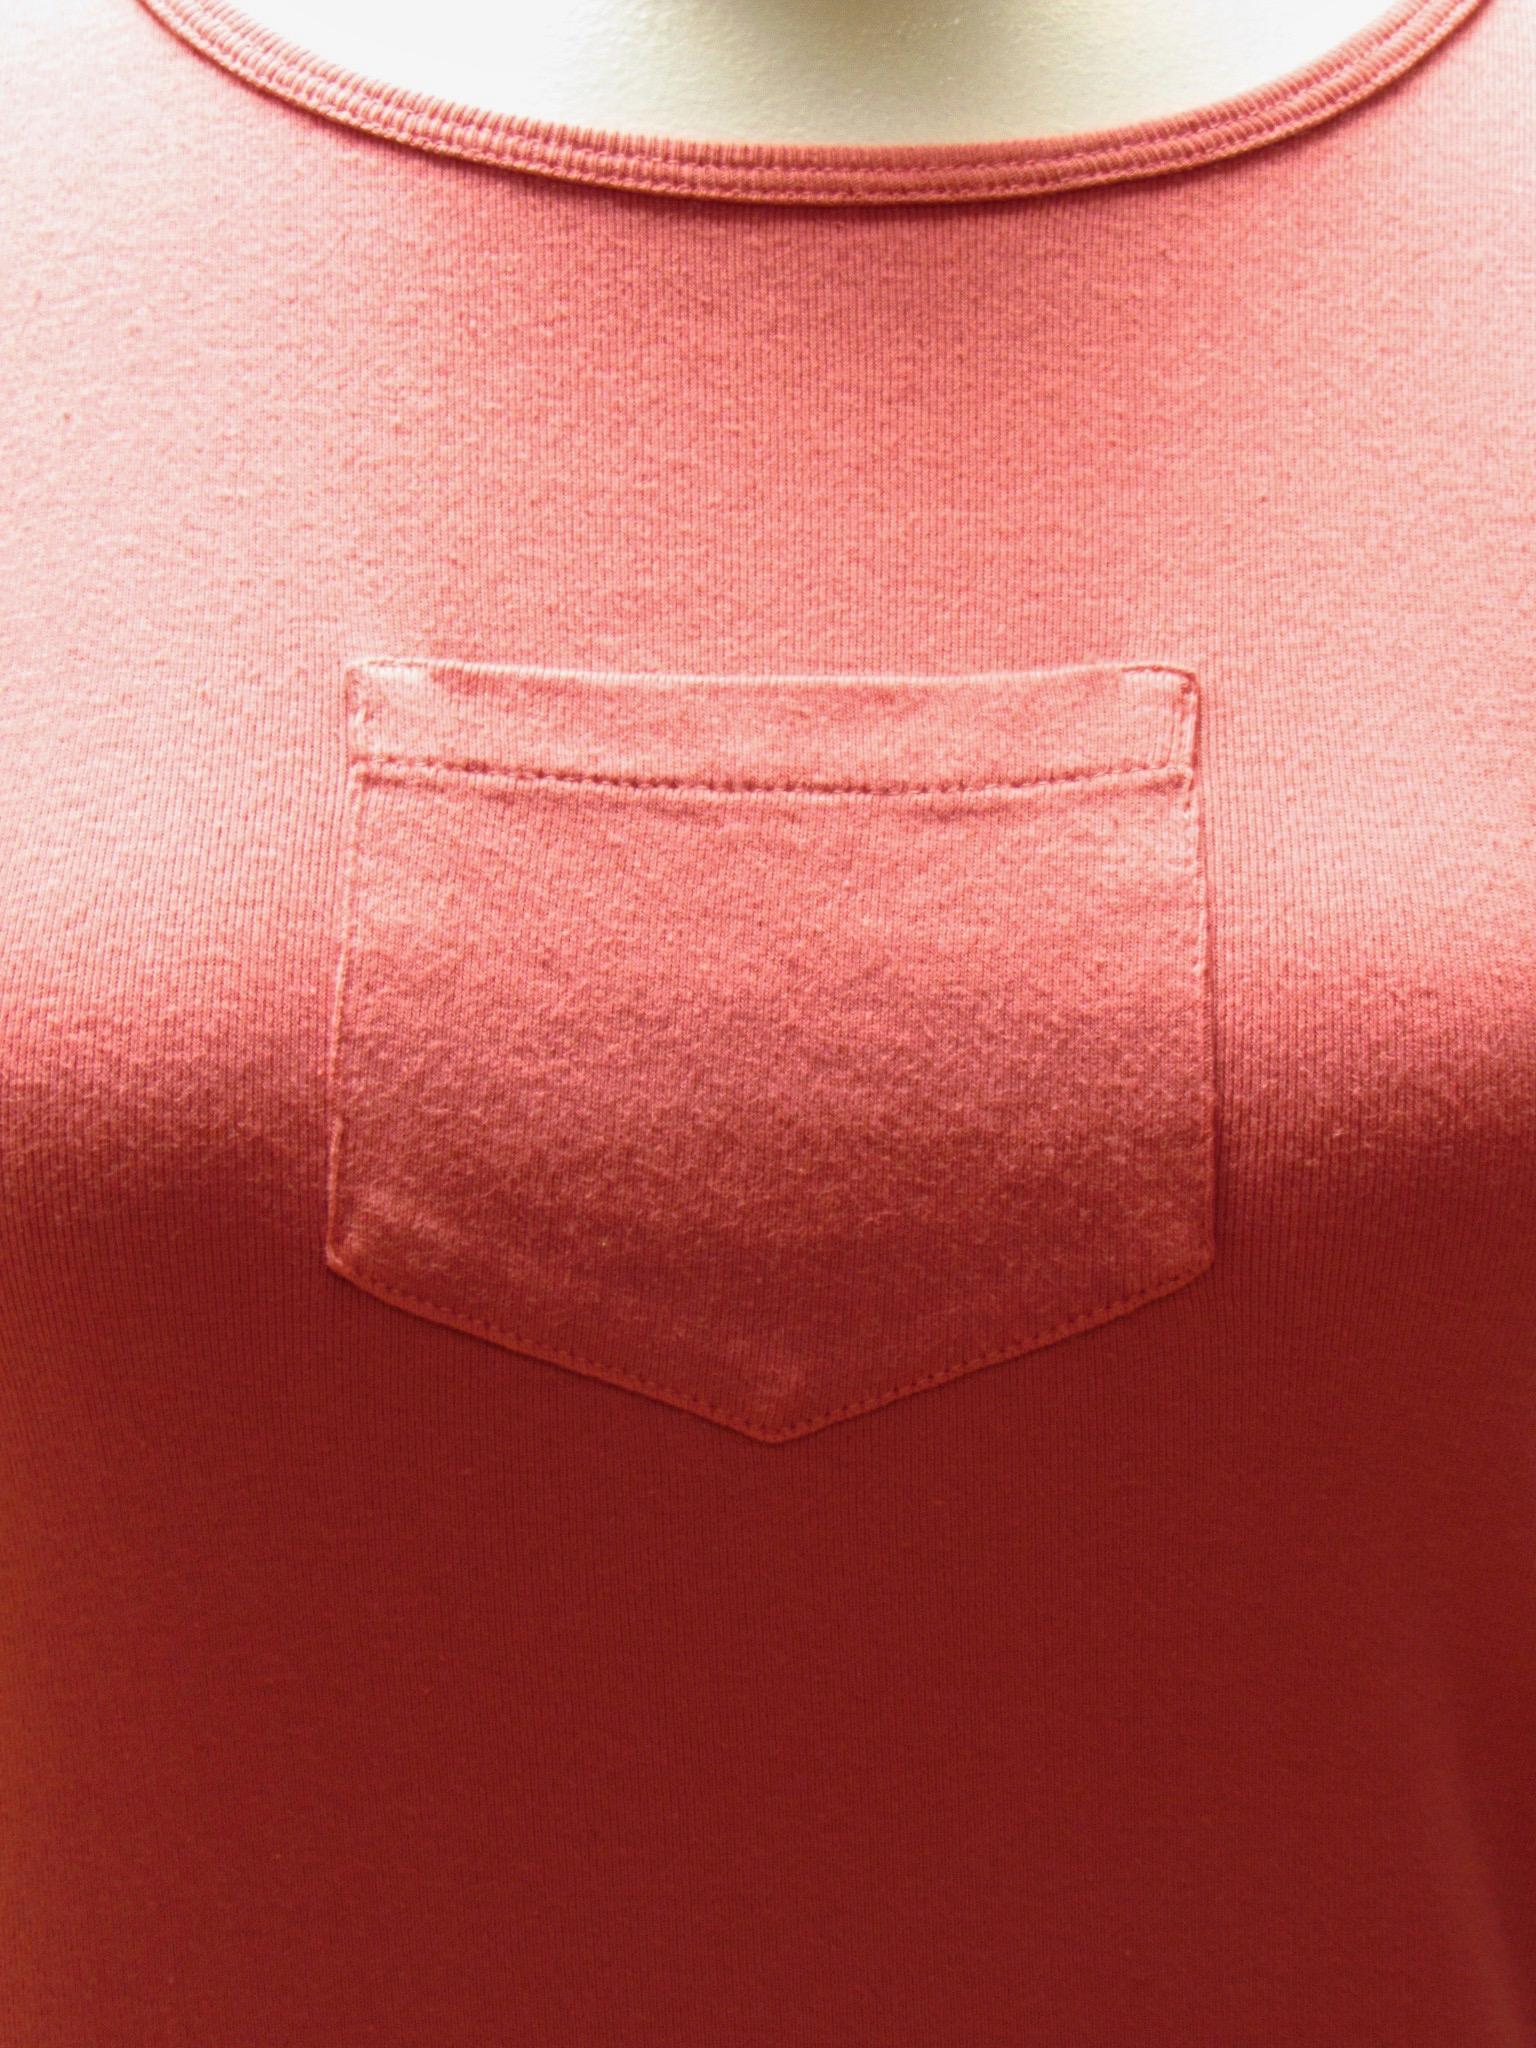 A coral cotton tee from Maison Martin Margiela stands out with a single breast pocket that sits front and center. 